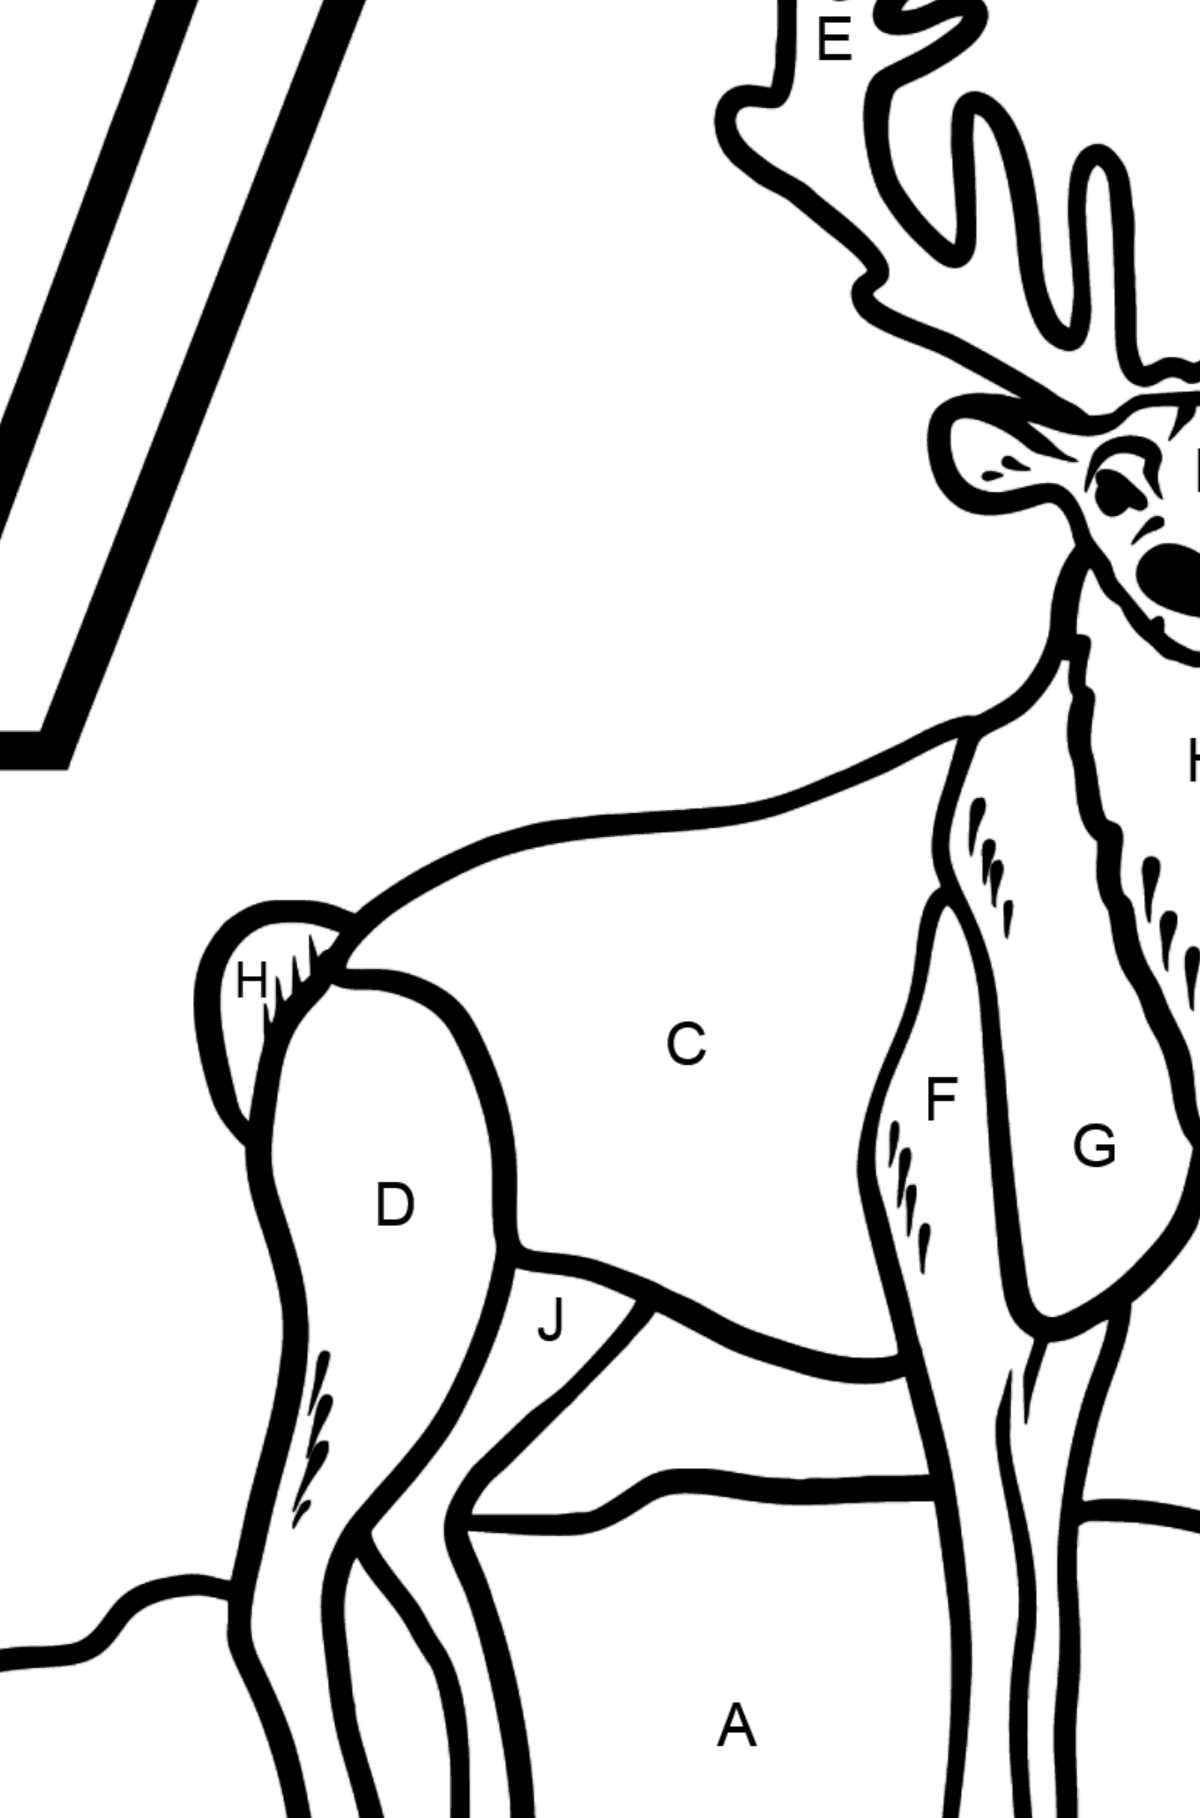 Portuguese Letter V coloring pages - VEADO - Coloring by Letters for Kids